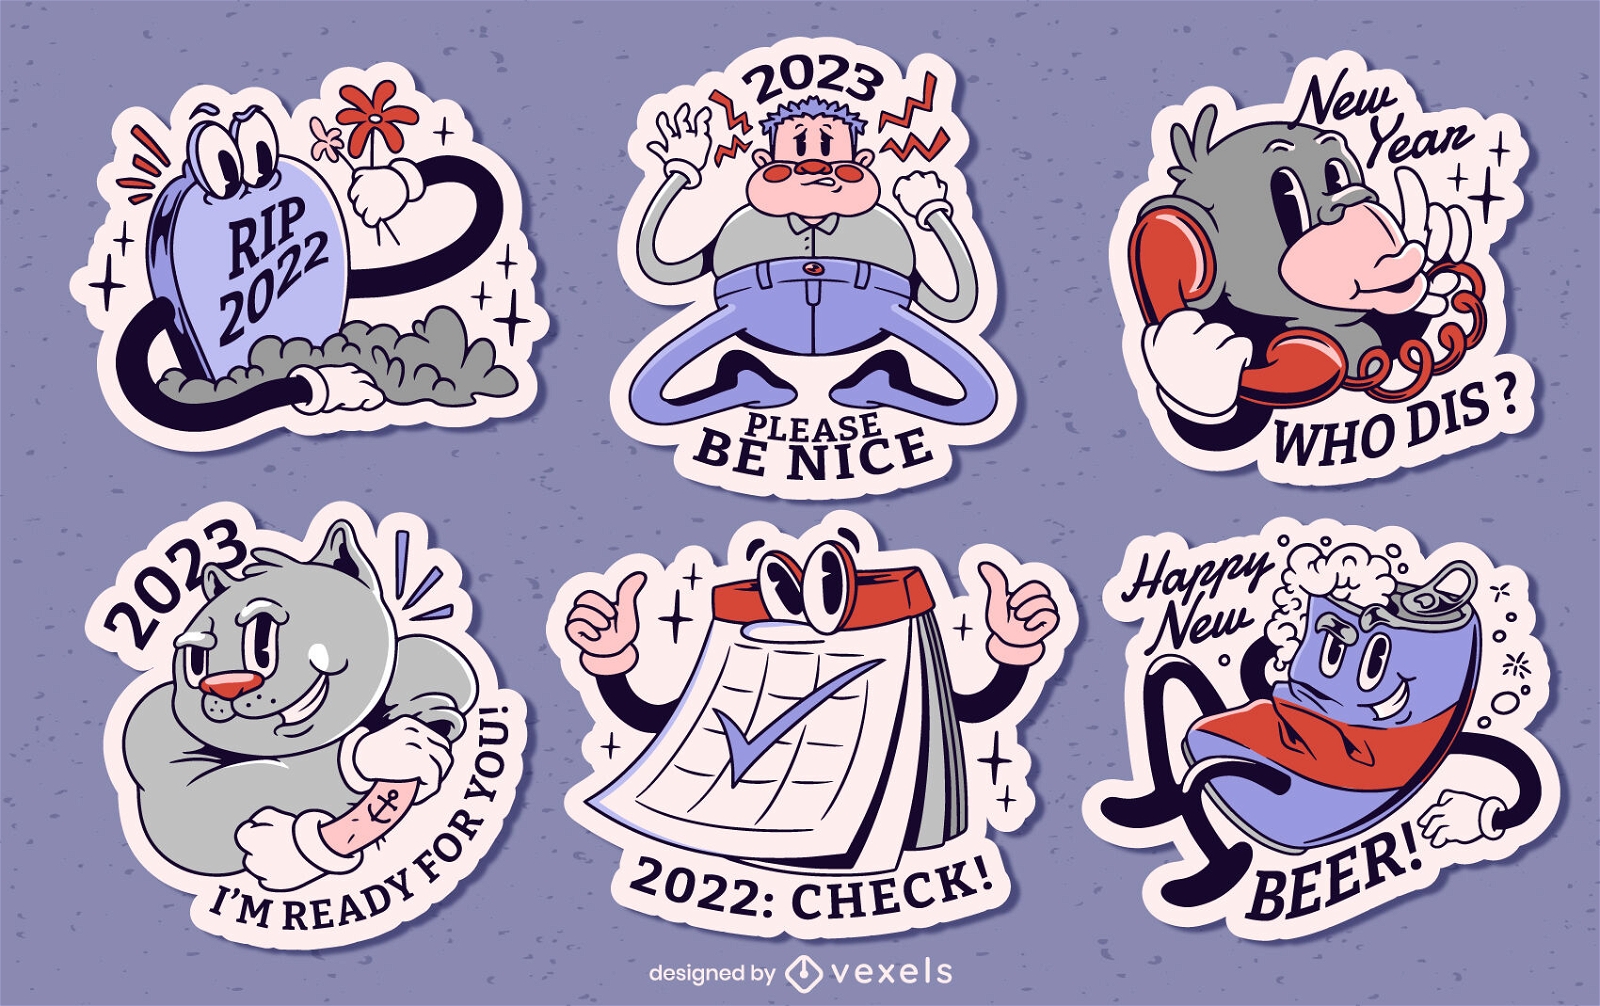 https://images.vexels.com/content/321402/preview/new-year-holiday-retro-cartoon-sticker-set-84a222.png